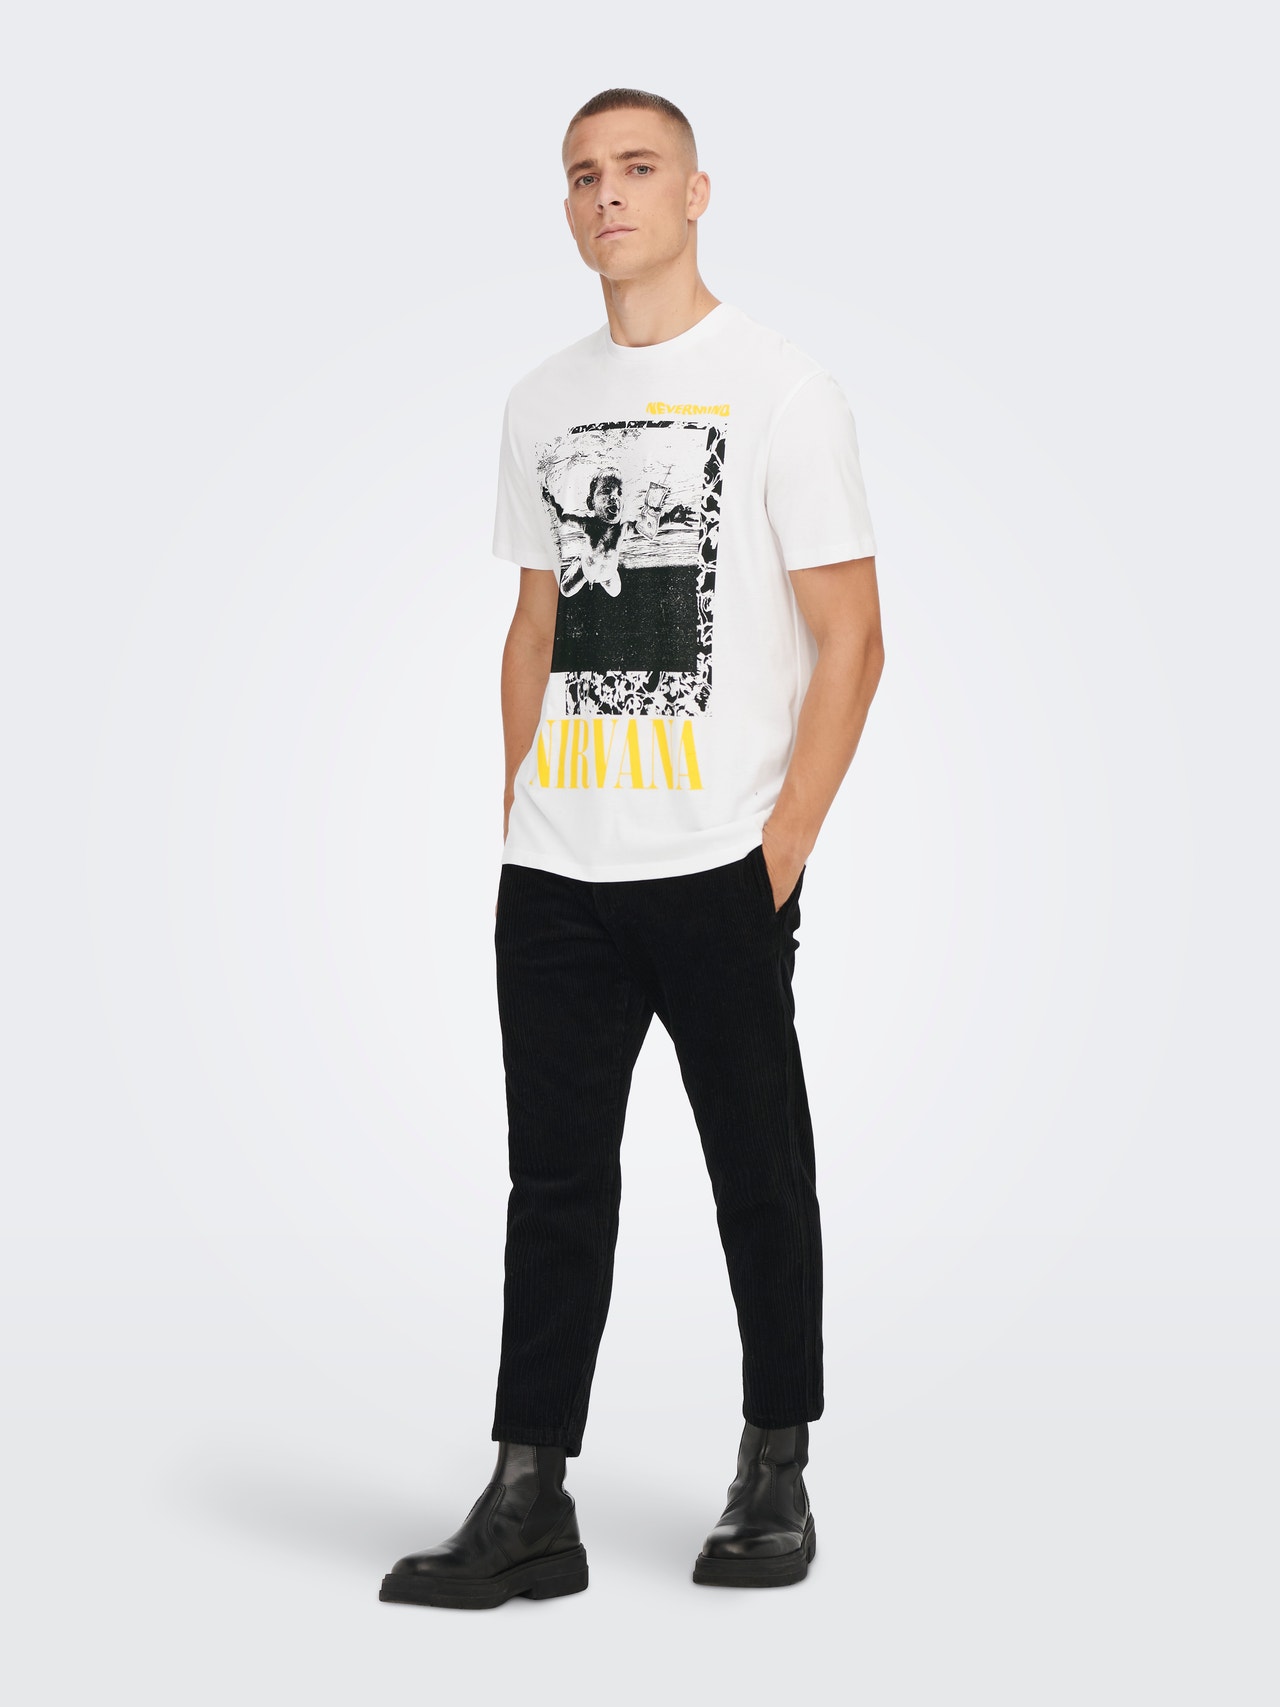 ONLY & SONS O-hals t-shirt with print -White - 22023782